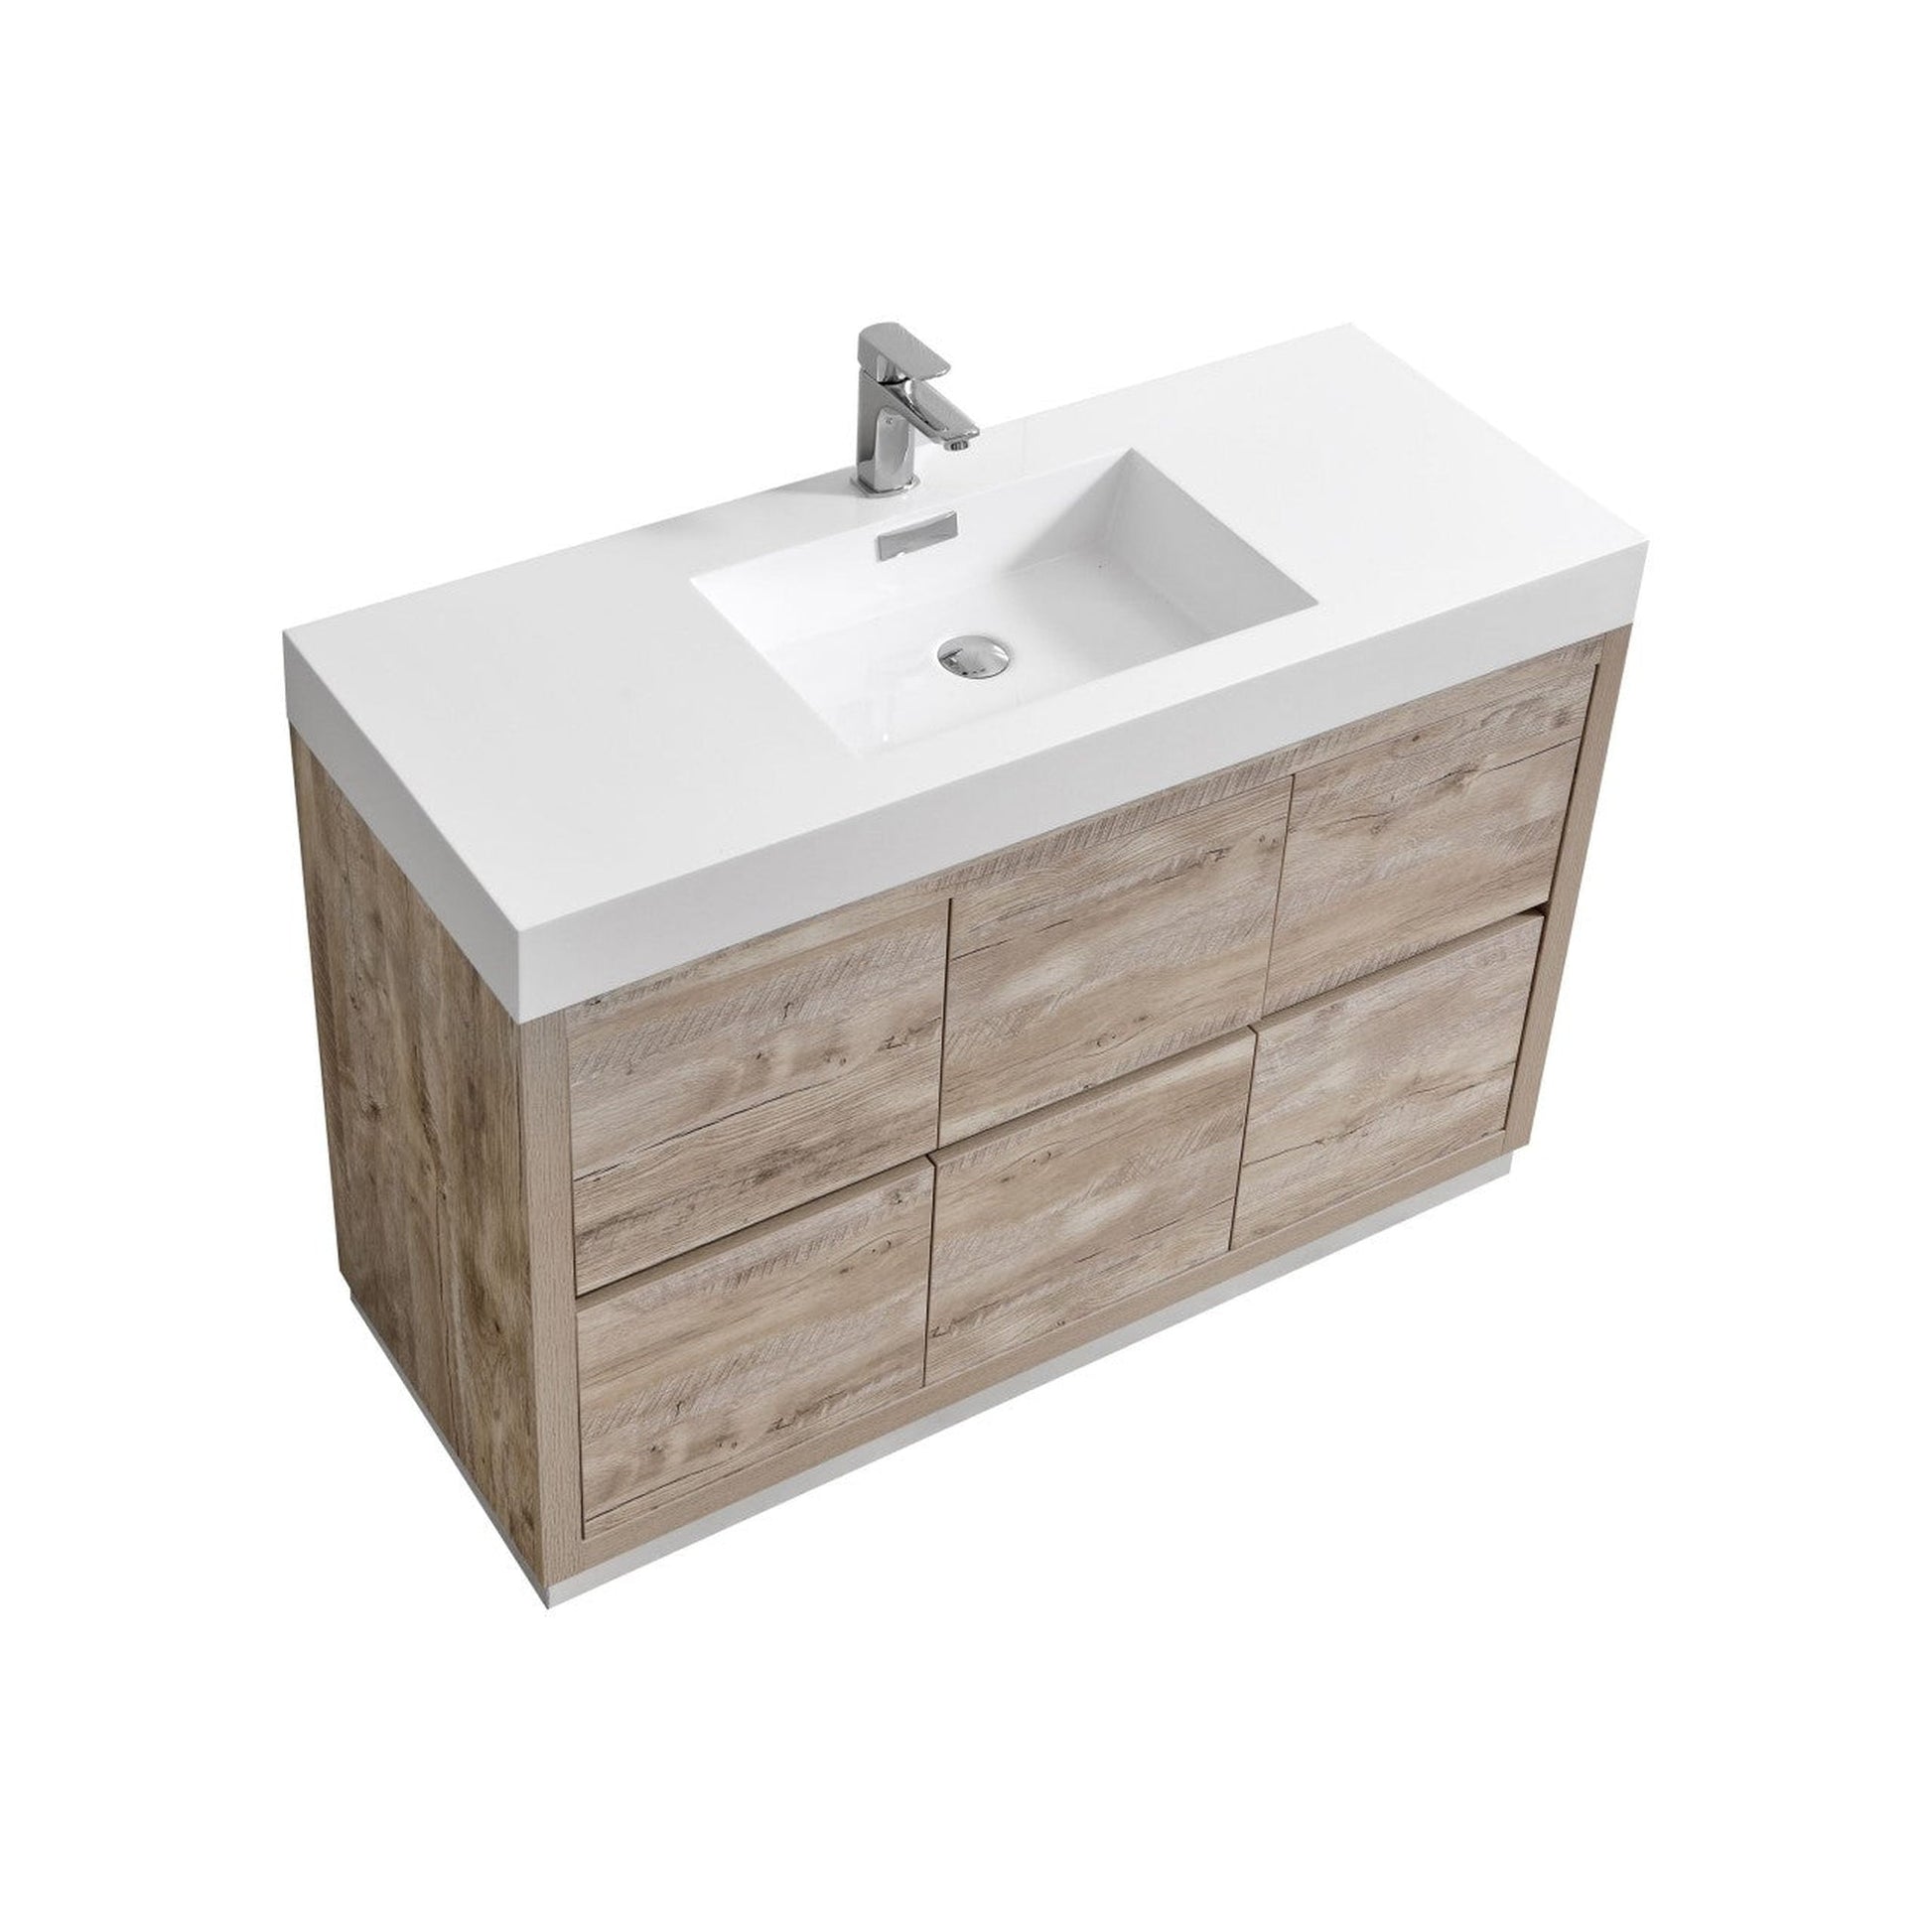 KubeBath Bliss 48" Nature Wood Freestanding Modern Bathroom Vanity With Single Integrated Acrylic Sink With Overflow and 48" Wood Framed Mirror With Shelf